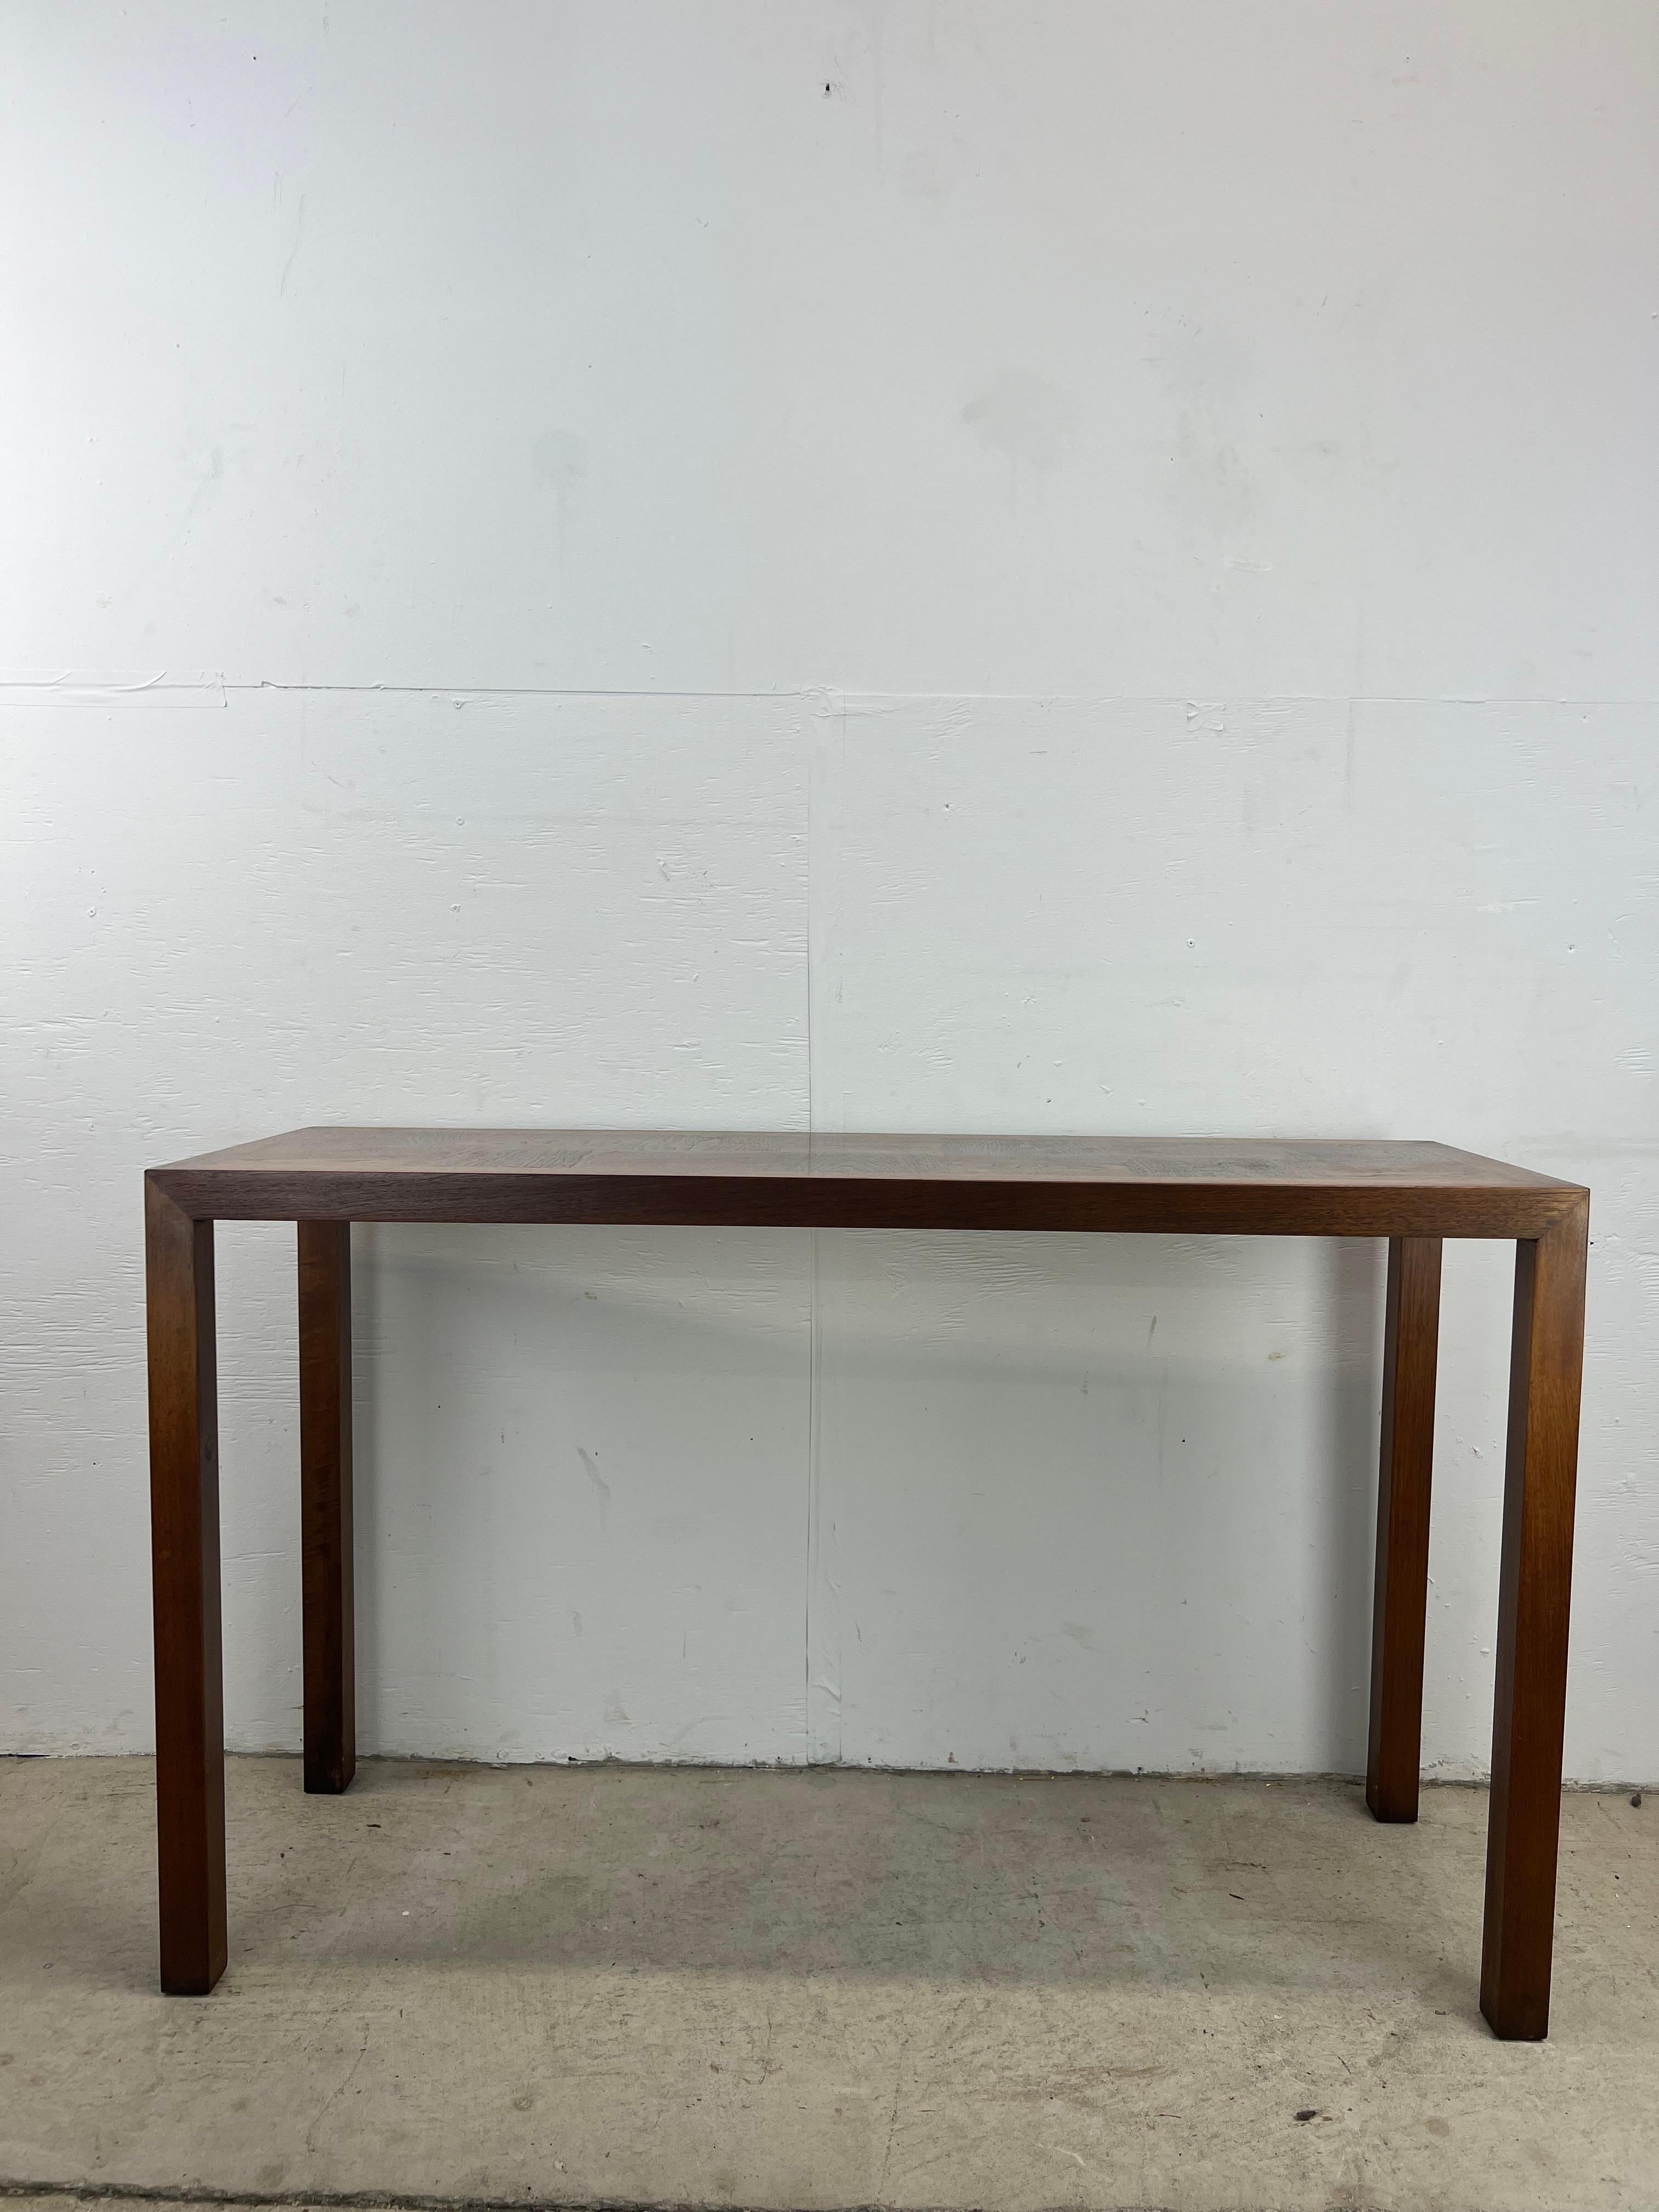 This mid century modern console / sofa table by Lane Furniture features hardwood construction, walnut veneer with original finish, and tall legs providing very clean lines.

 Dimensions: 48w 16d 29.5h

Condition: Original walnut finish is in